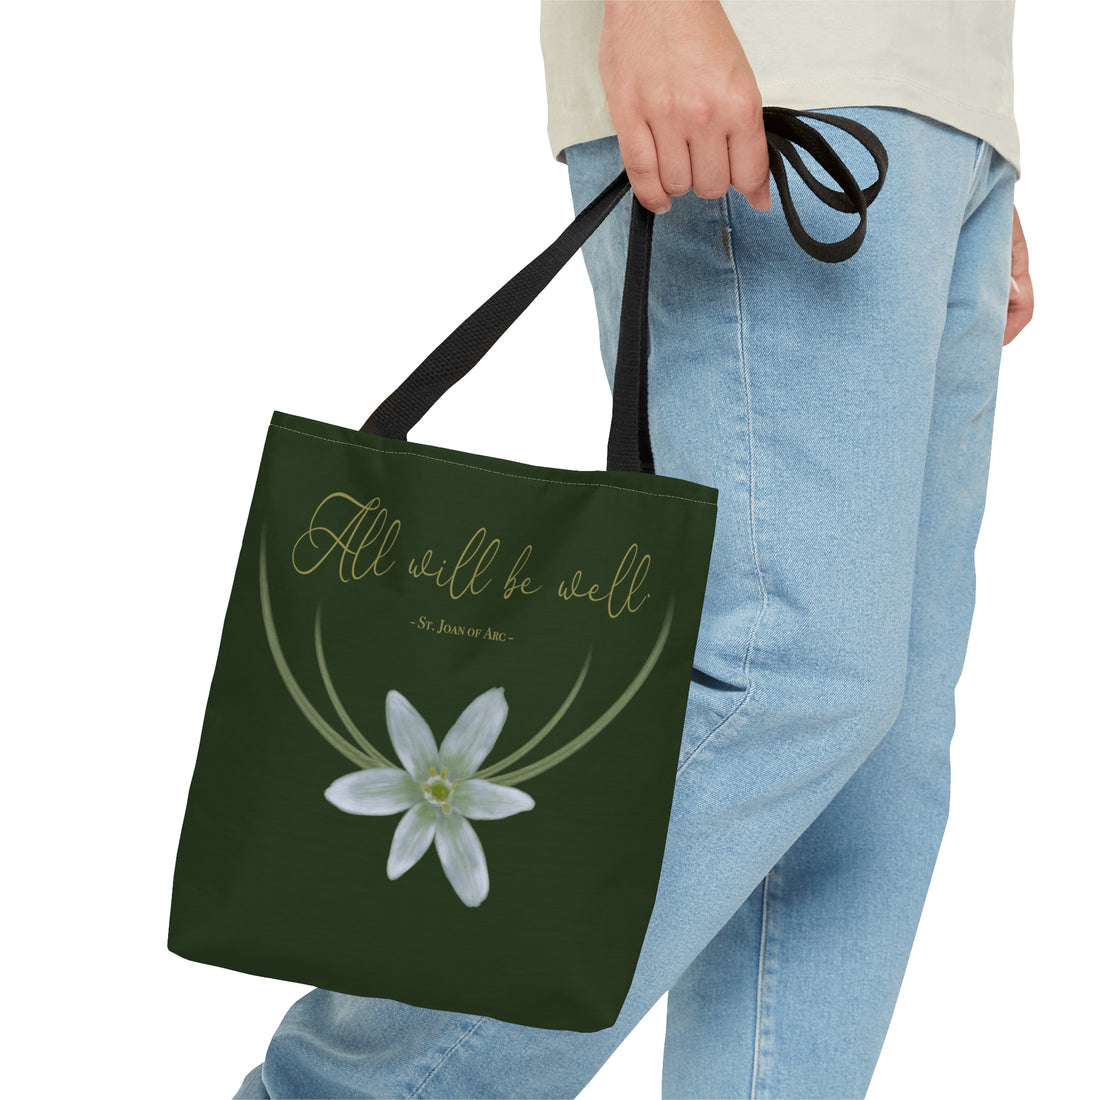 “All will be well.” Tote Bag